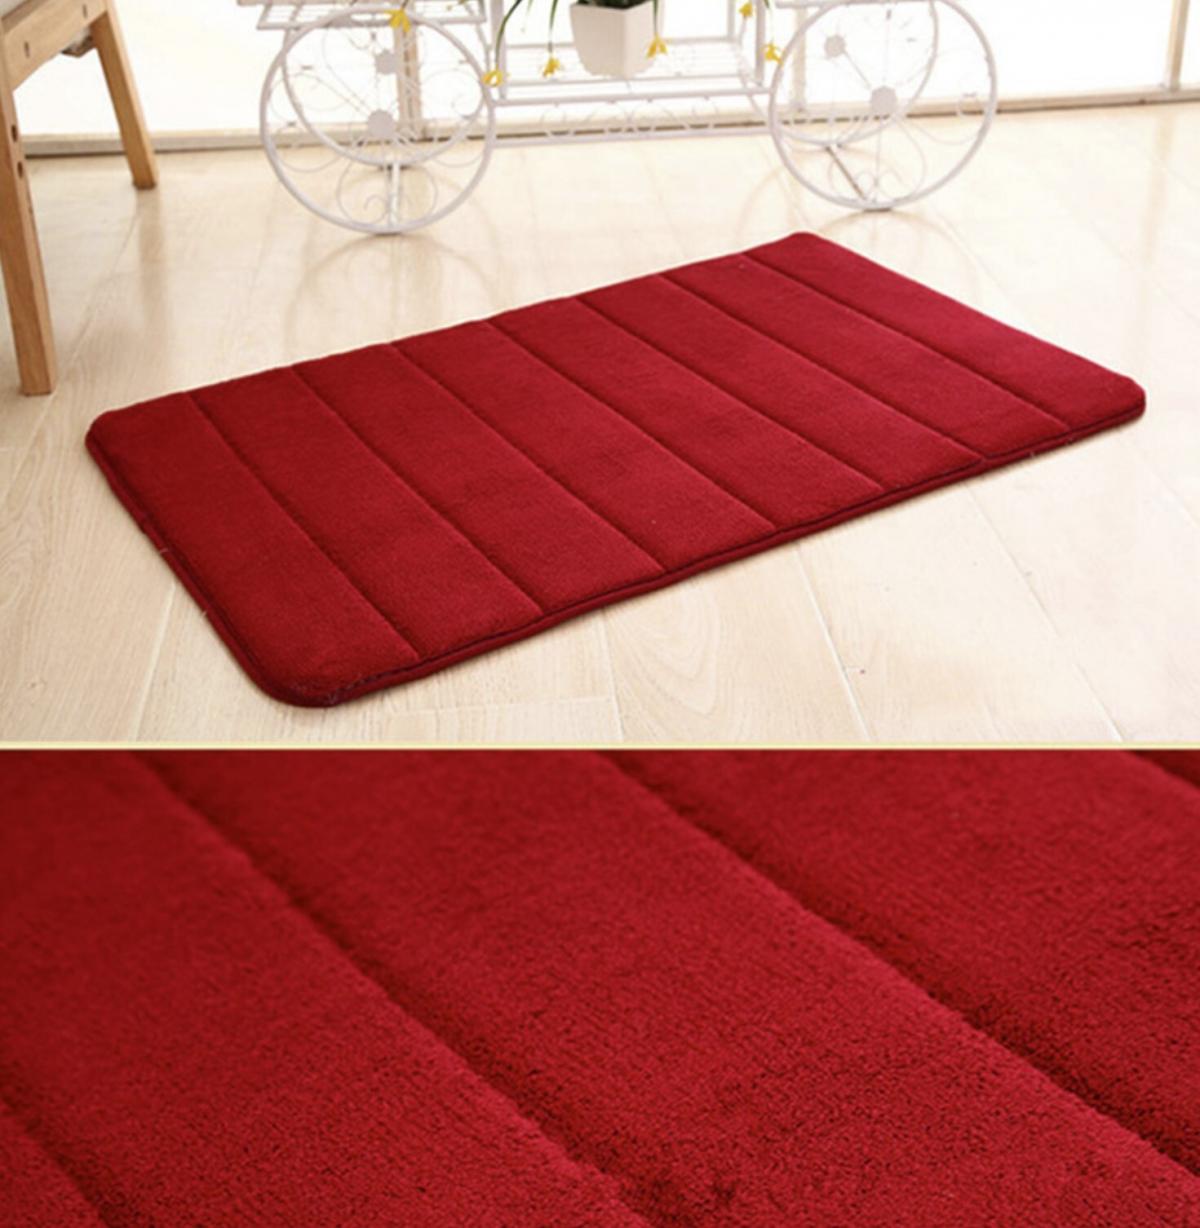 *Clearance*Coral Fleece Absorbent Floor Mat (40*60cm) - Wine Red*Clearance*｜{I4b3} 